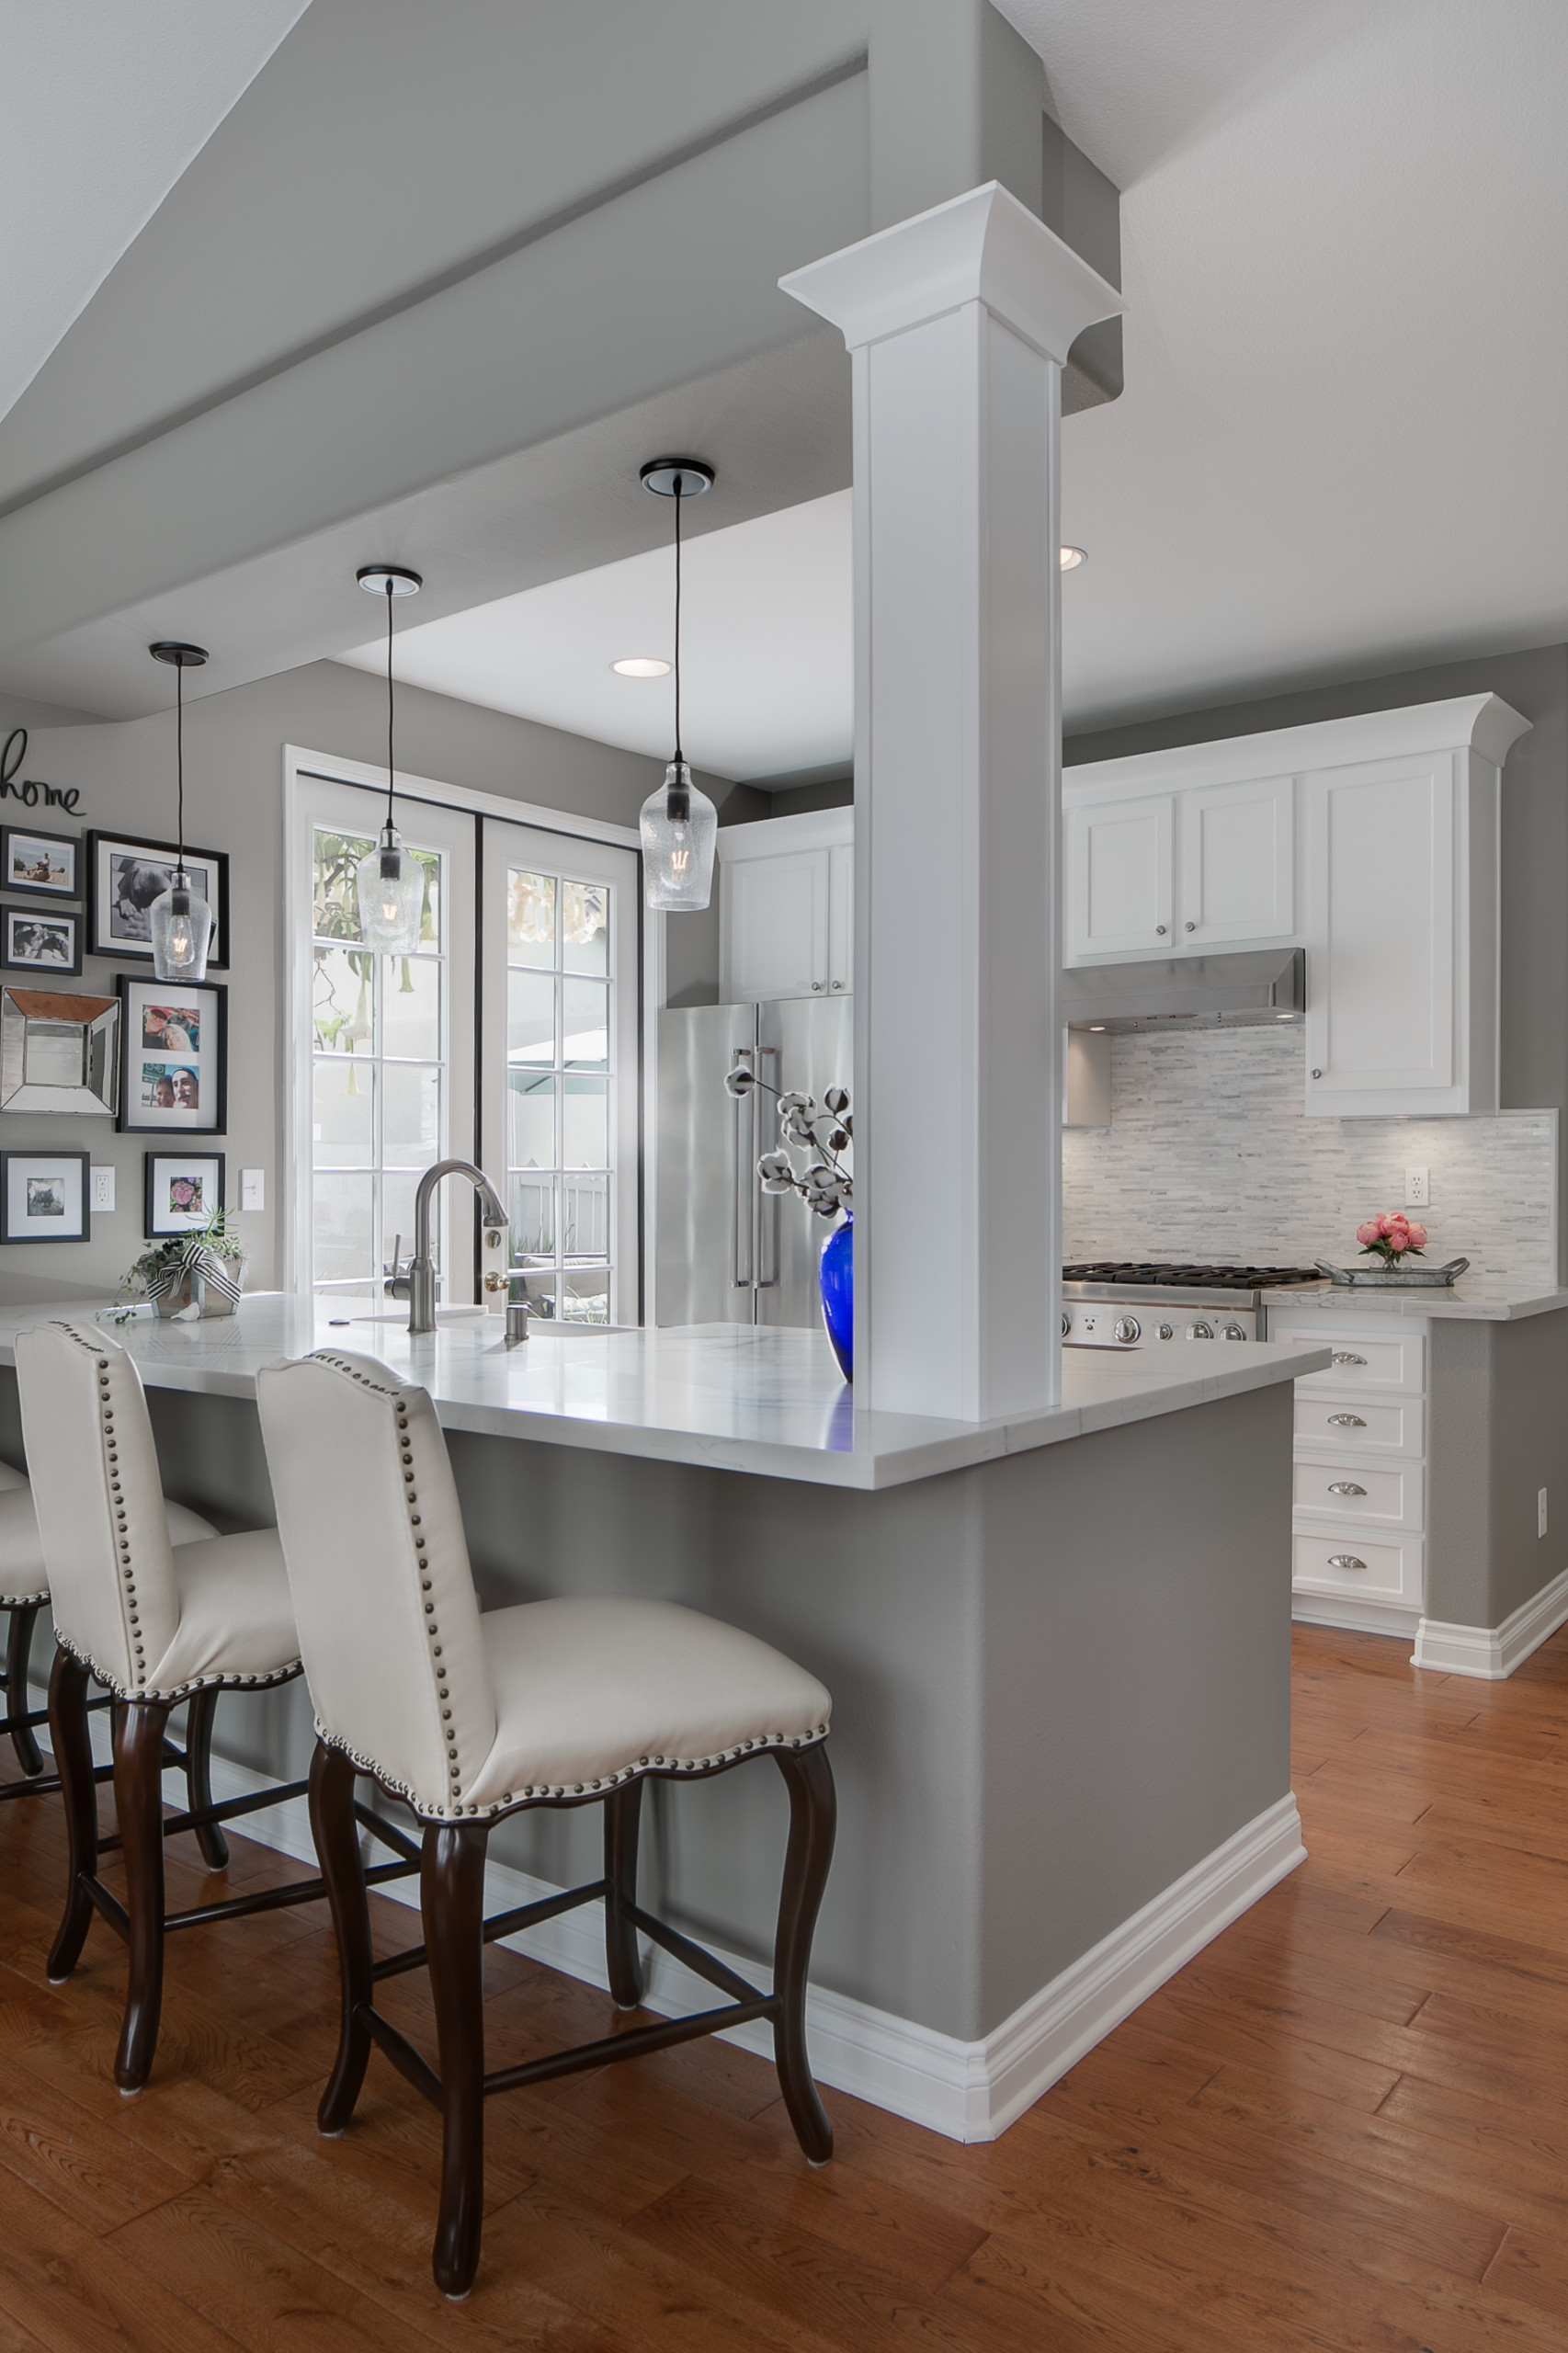 75 Beautiful Small Kitchen With A Farmhouse Sink Pictures & Ideas -  November, 2020 | Houzz